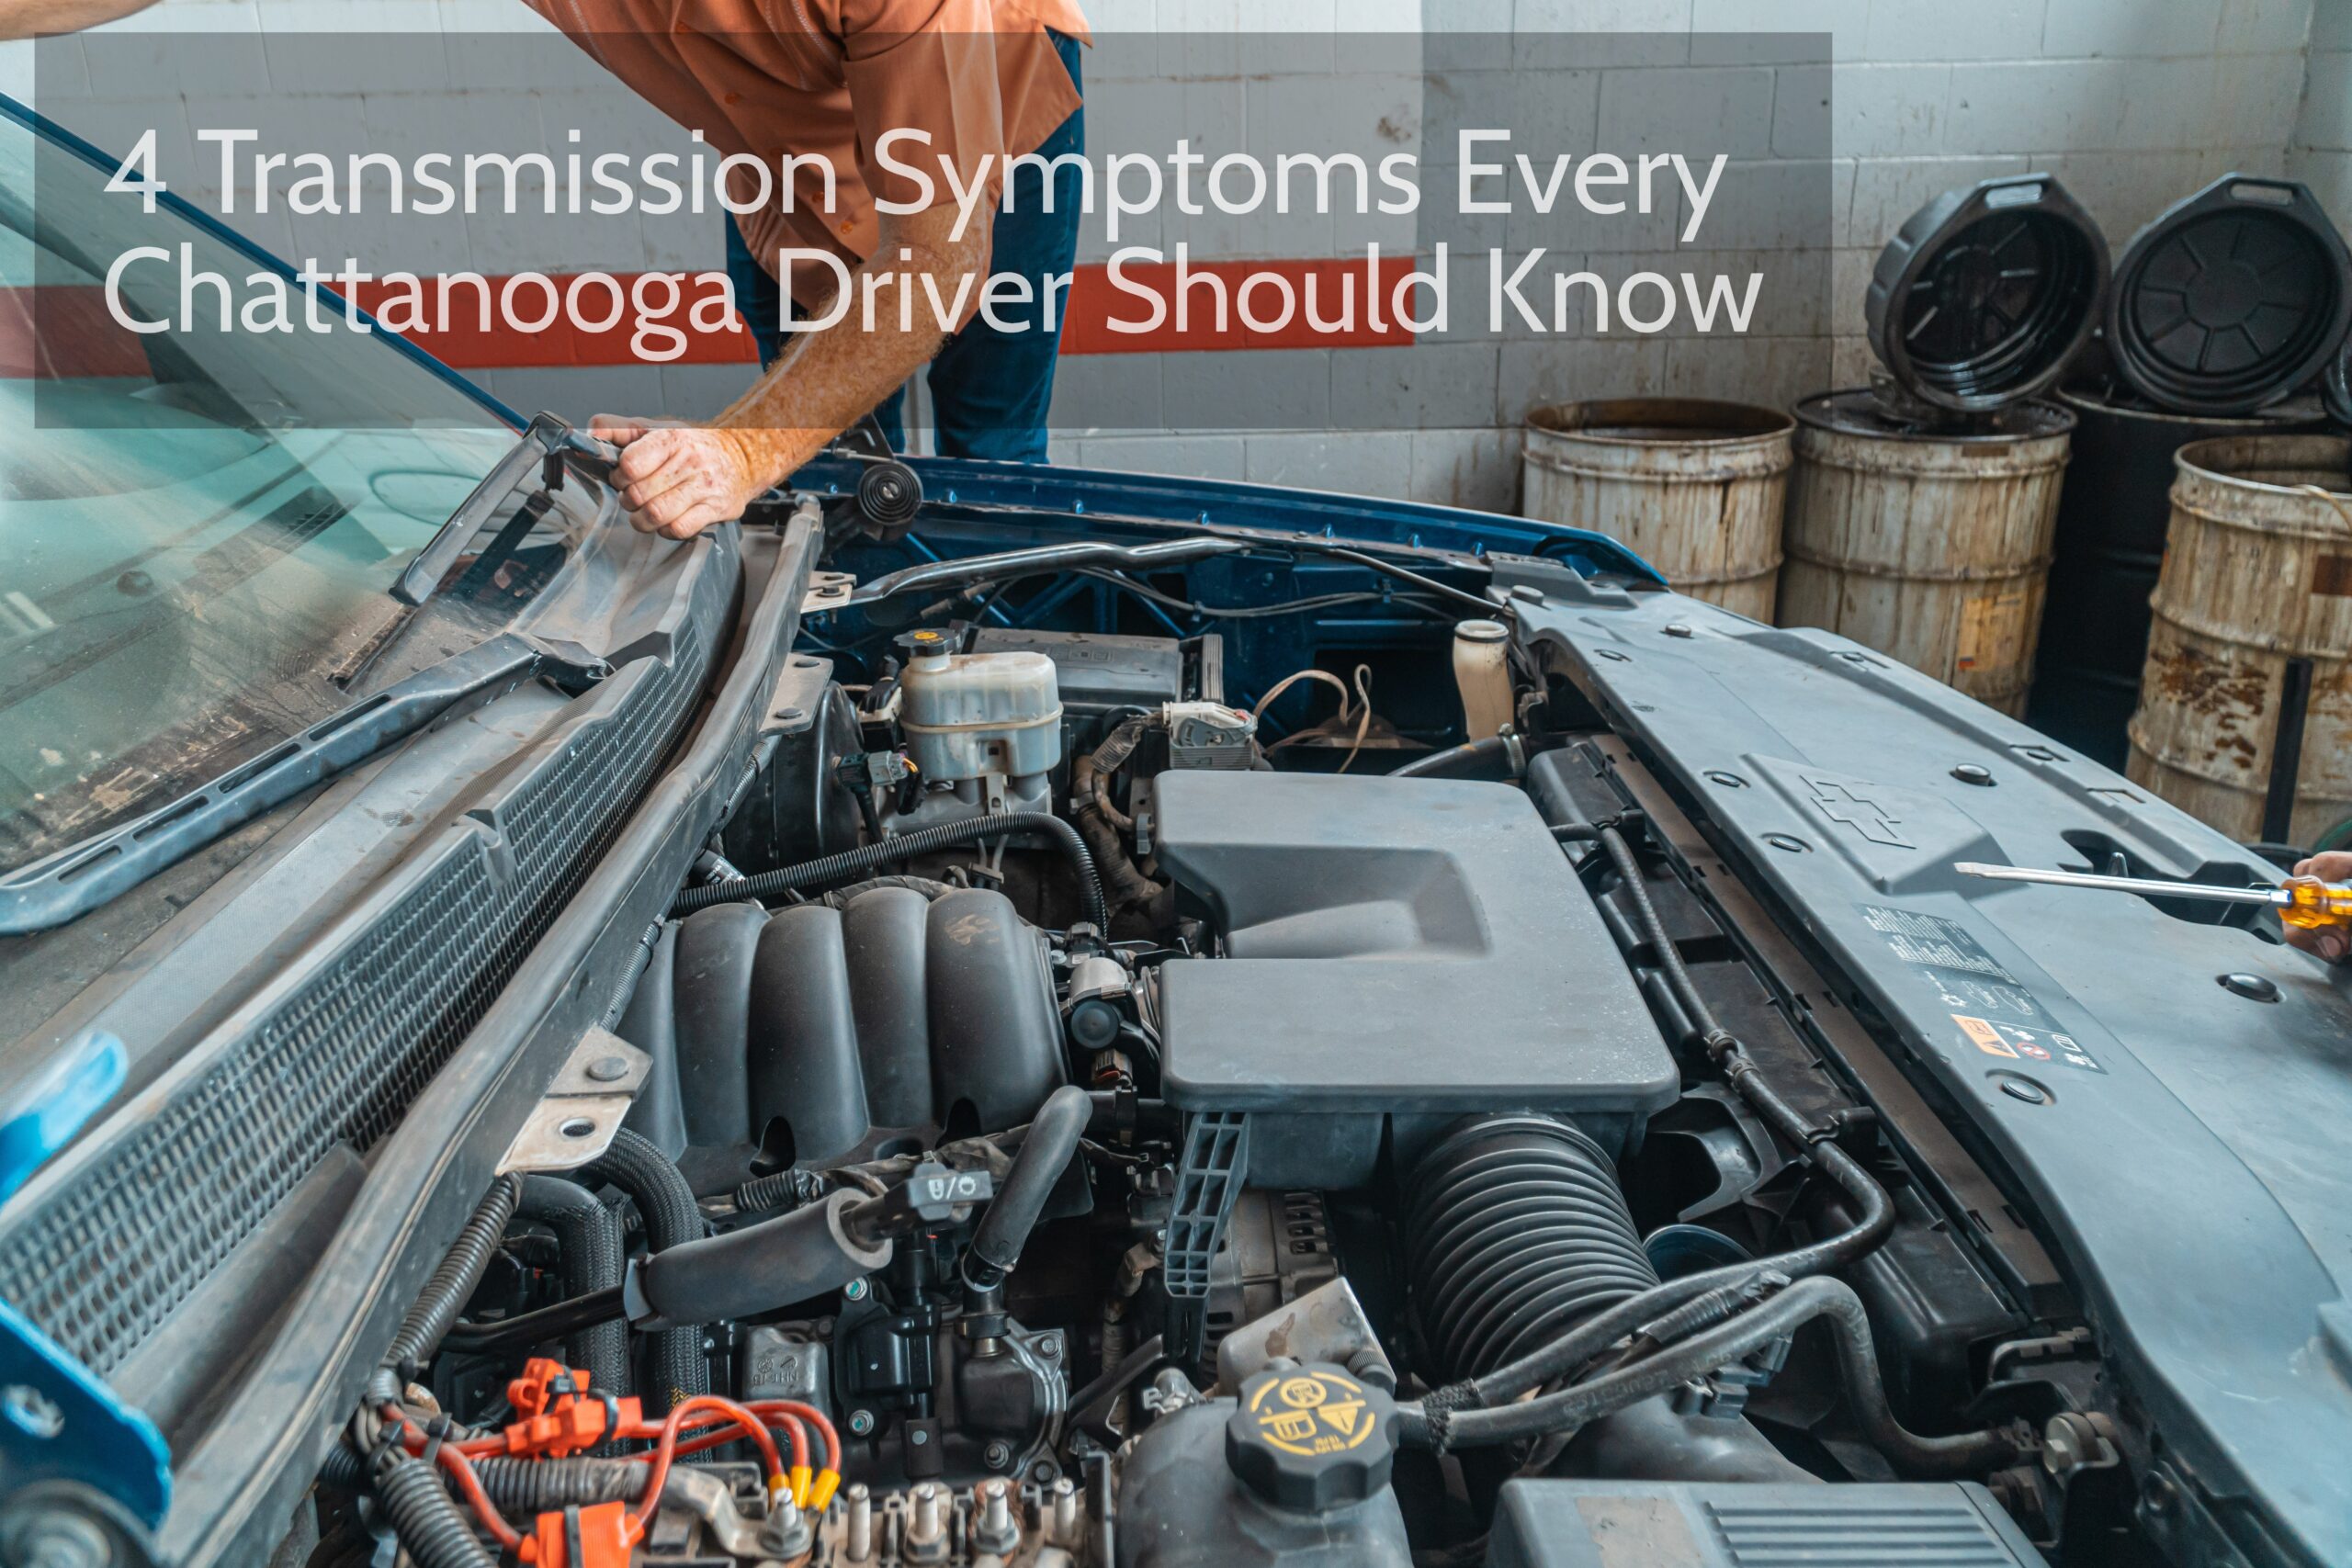 Check transmission symptoms in a car engine under the open hood